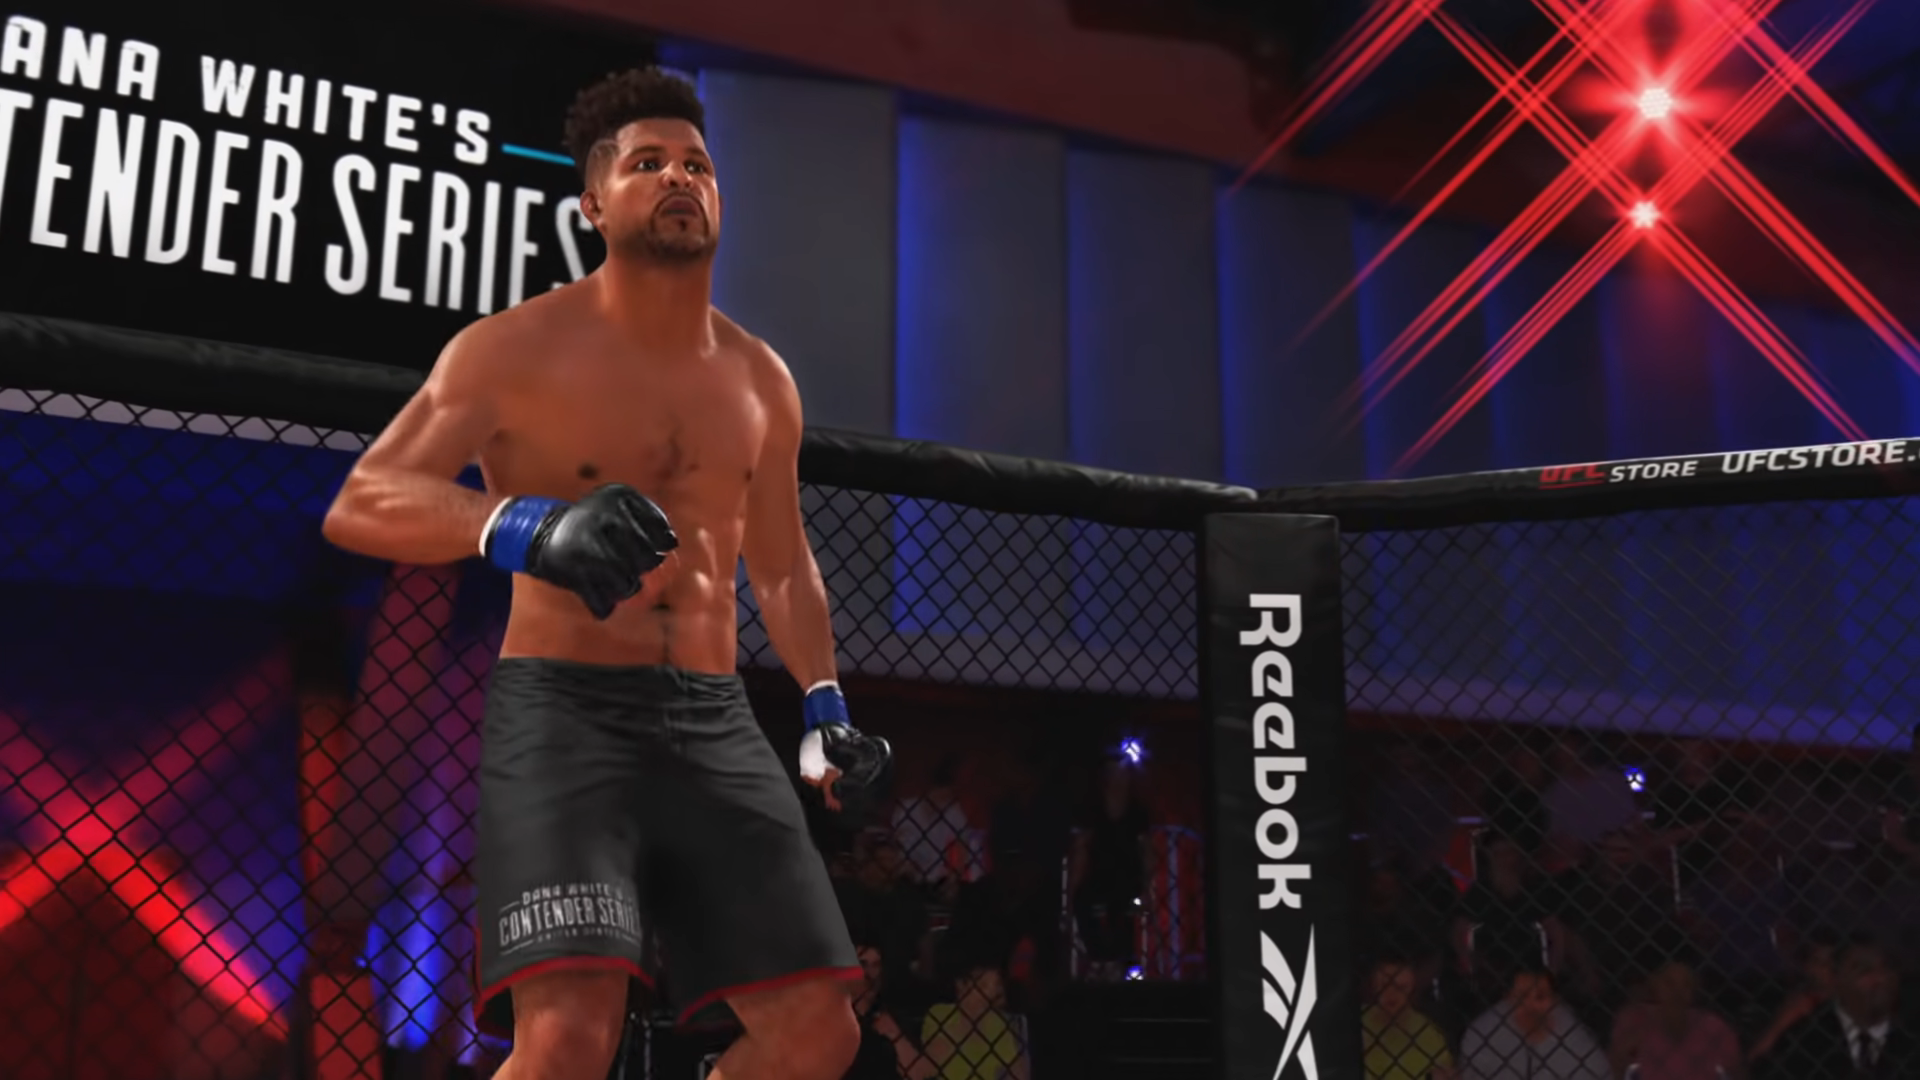  How to earn a contract with Dana White’s Contender Series in UFC 4 